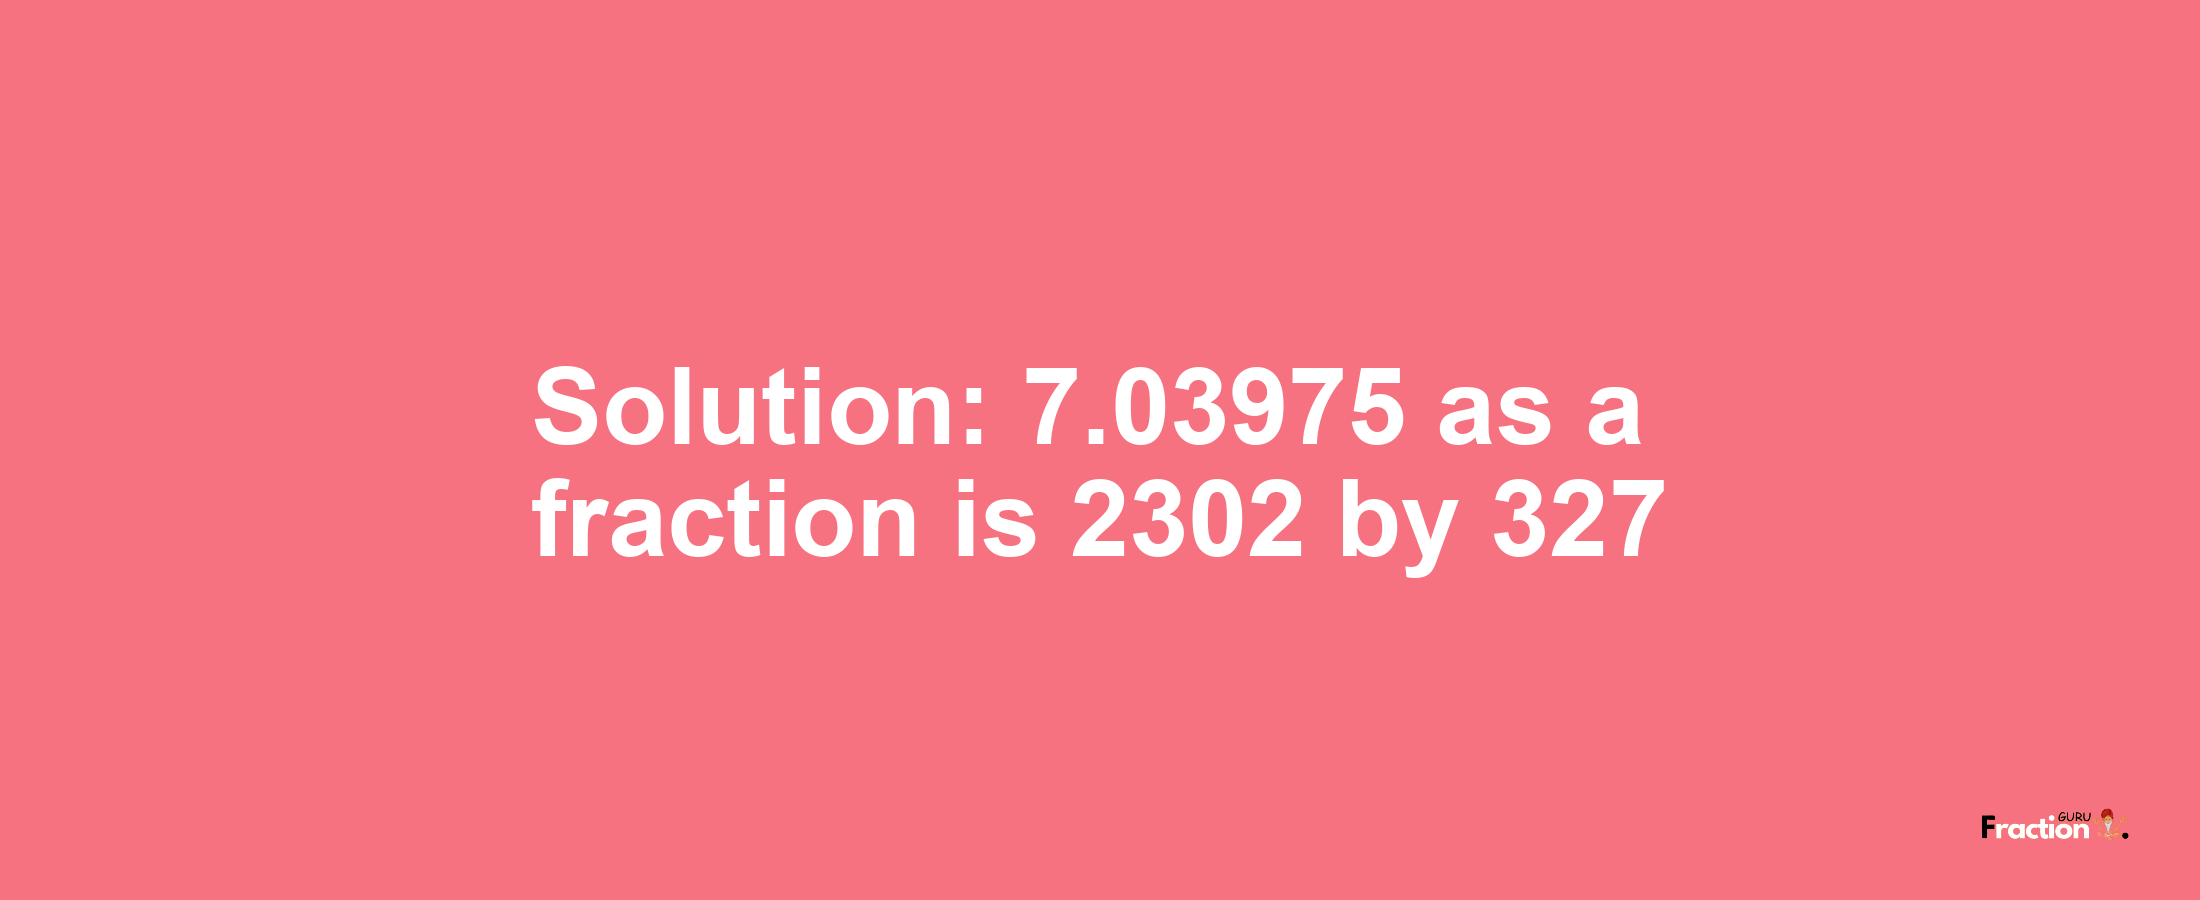 Solution:7.03975 as a fraction is 2302/327